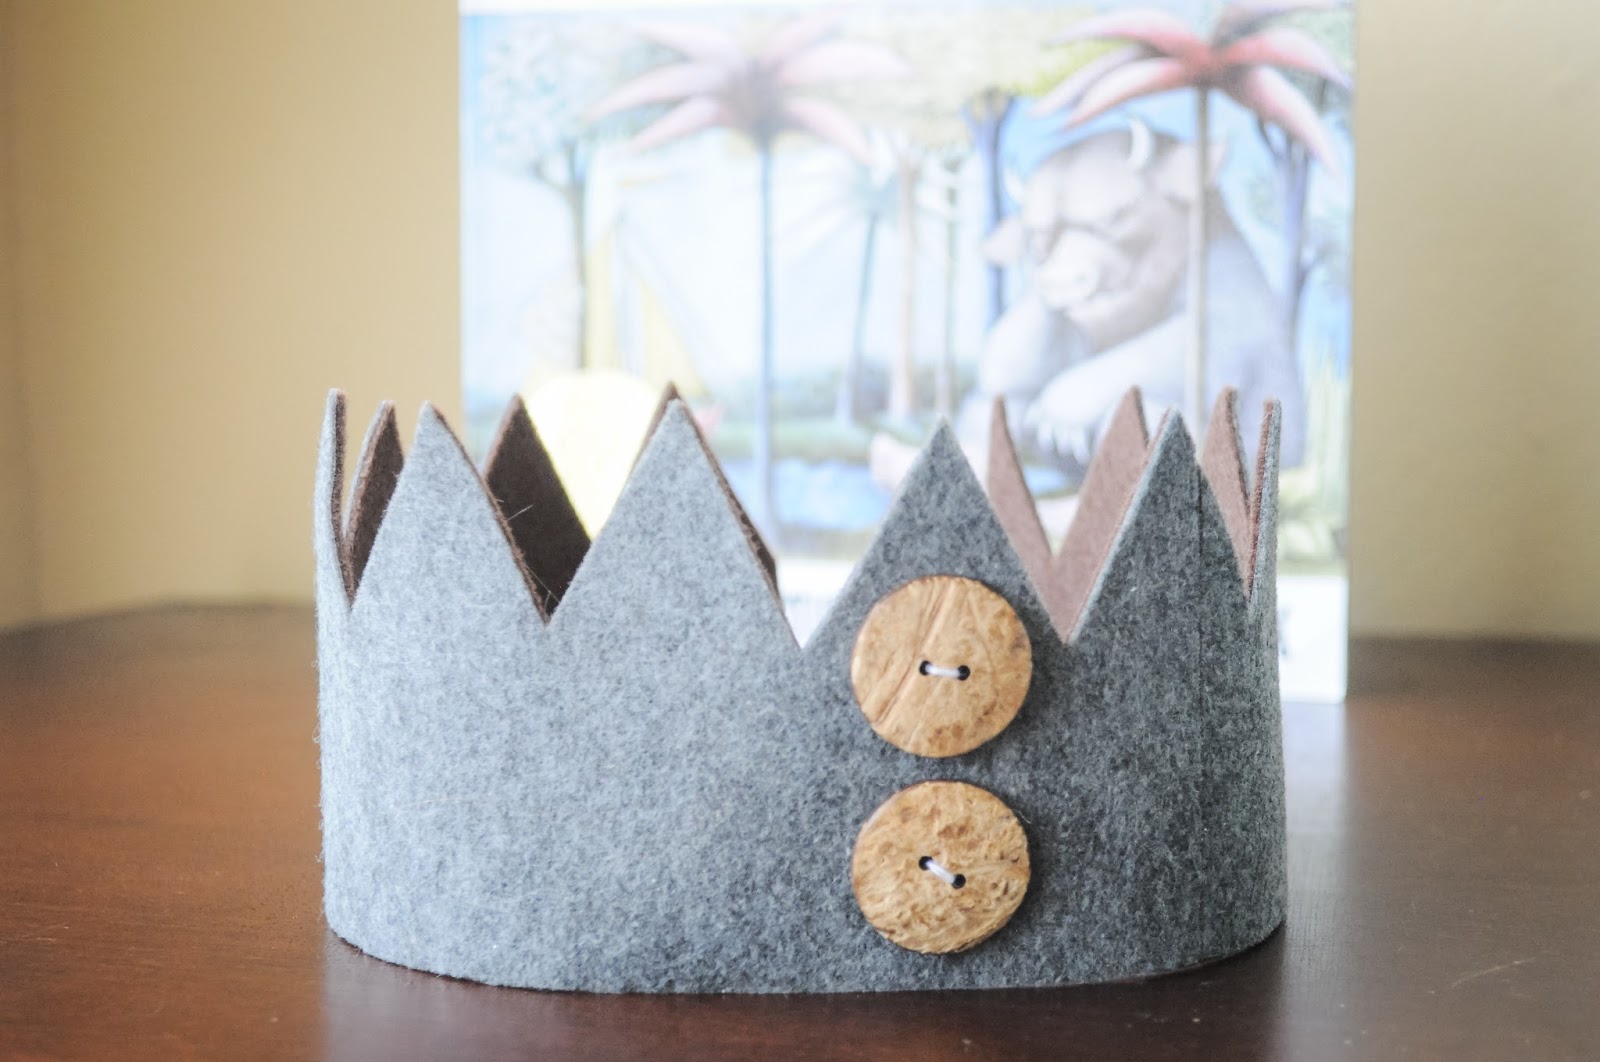 How to Make a Paper Crown (with Free Template!) - The Craft-at-Home Family